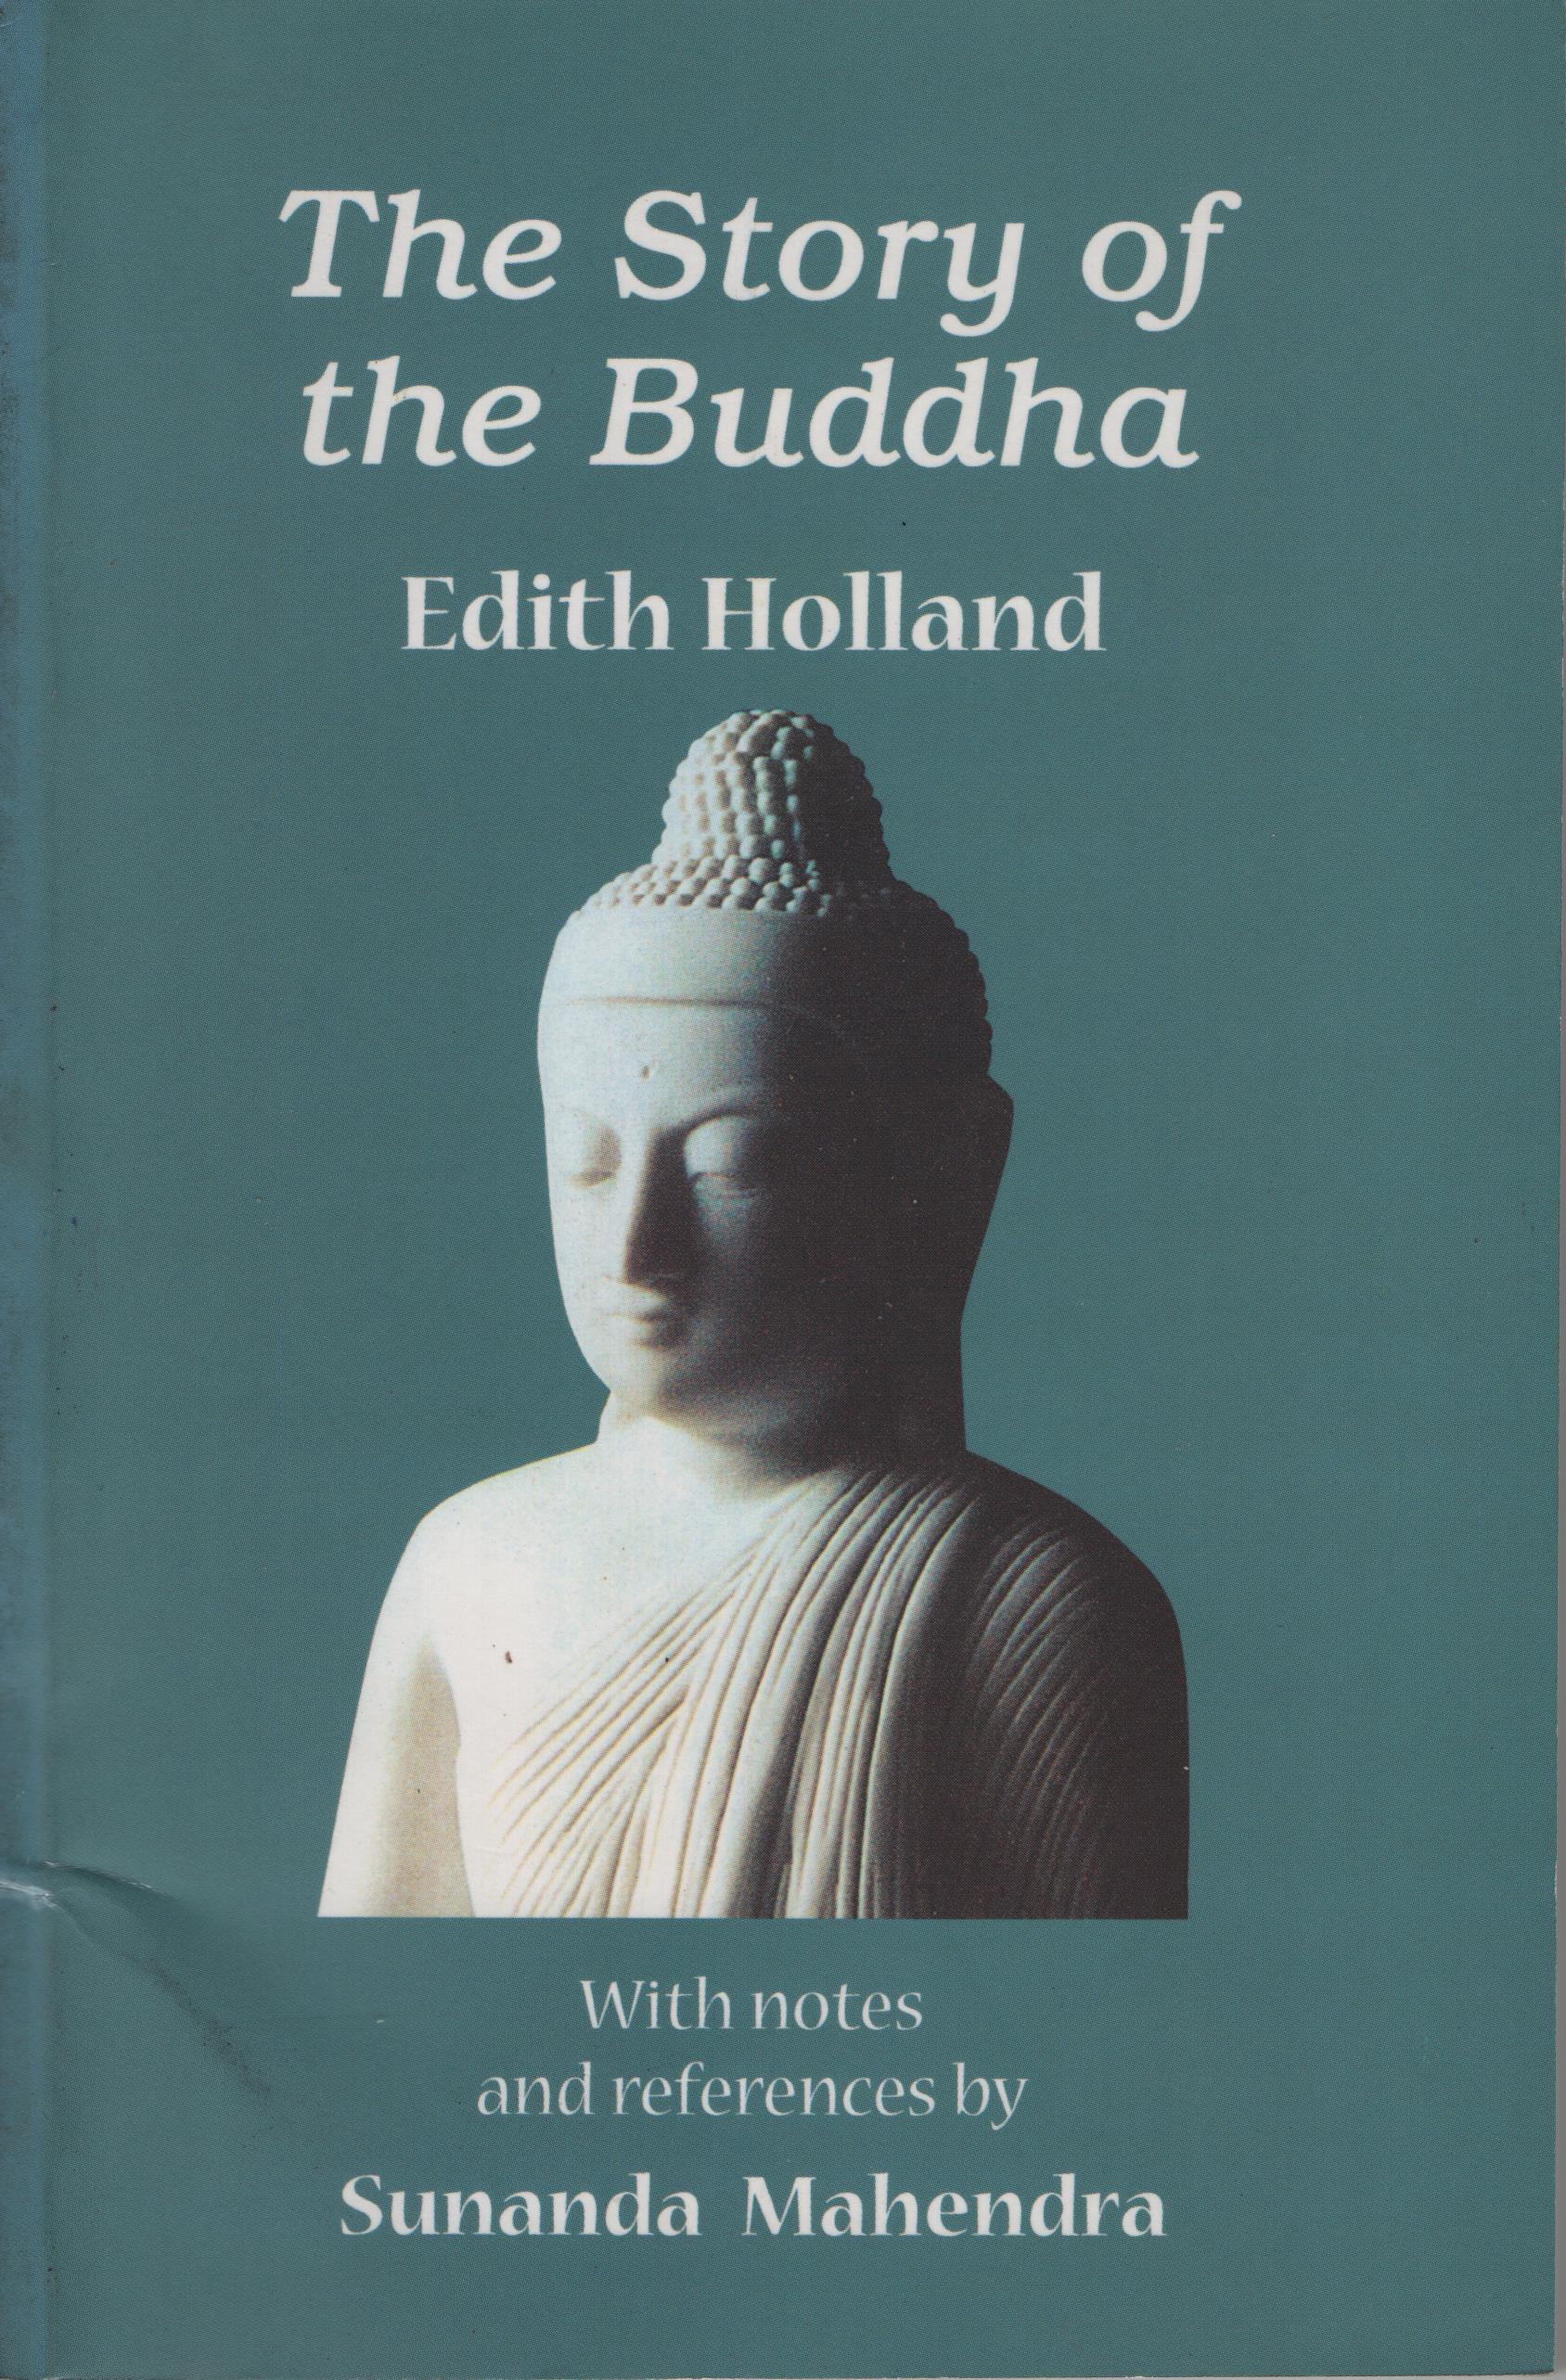 The Story of the Buddha